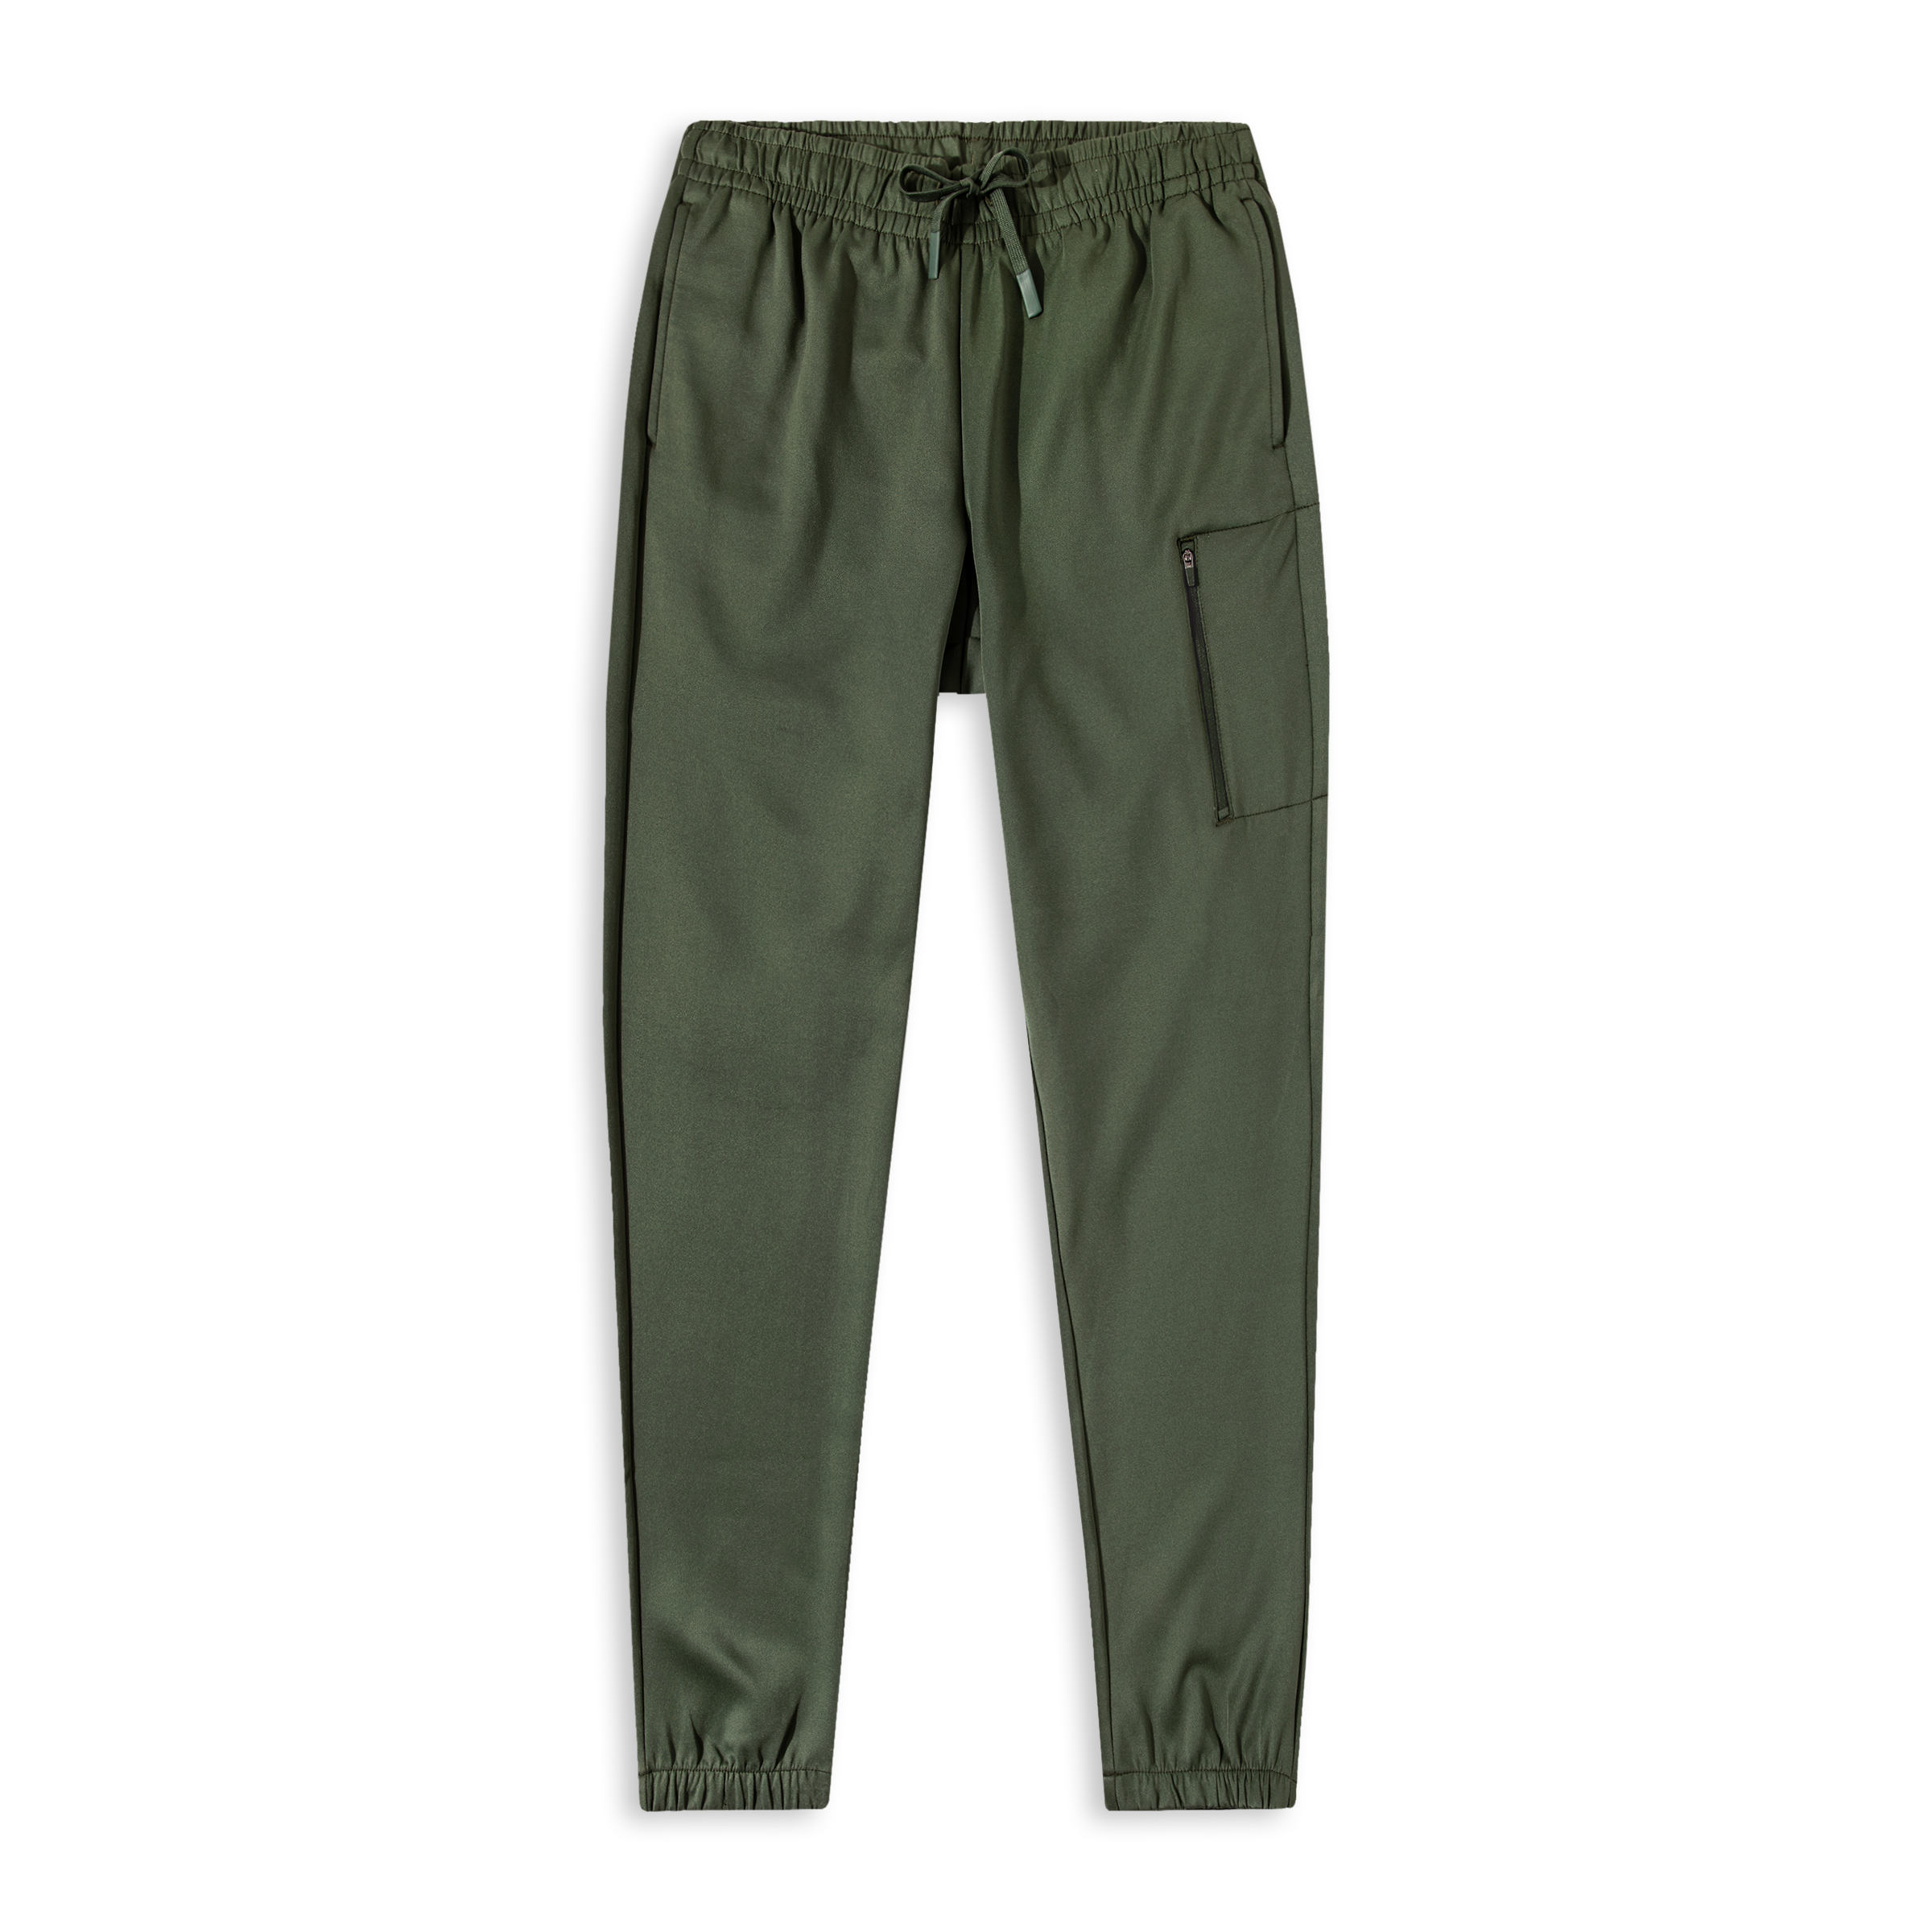 Scuba Jogger Military Green front with thigh zip pocket and ribbed cuffs